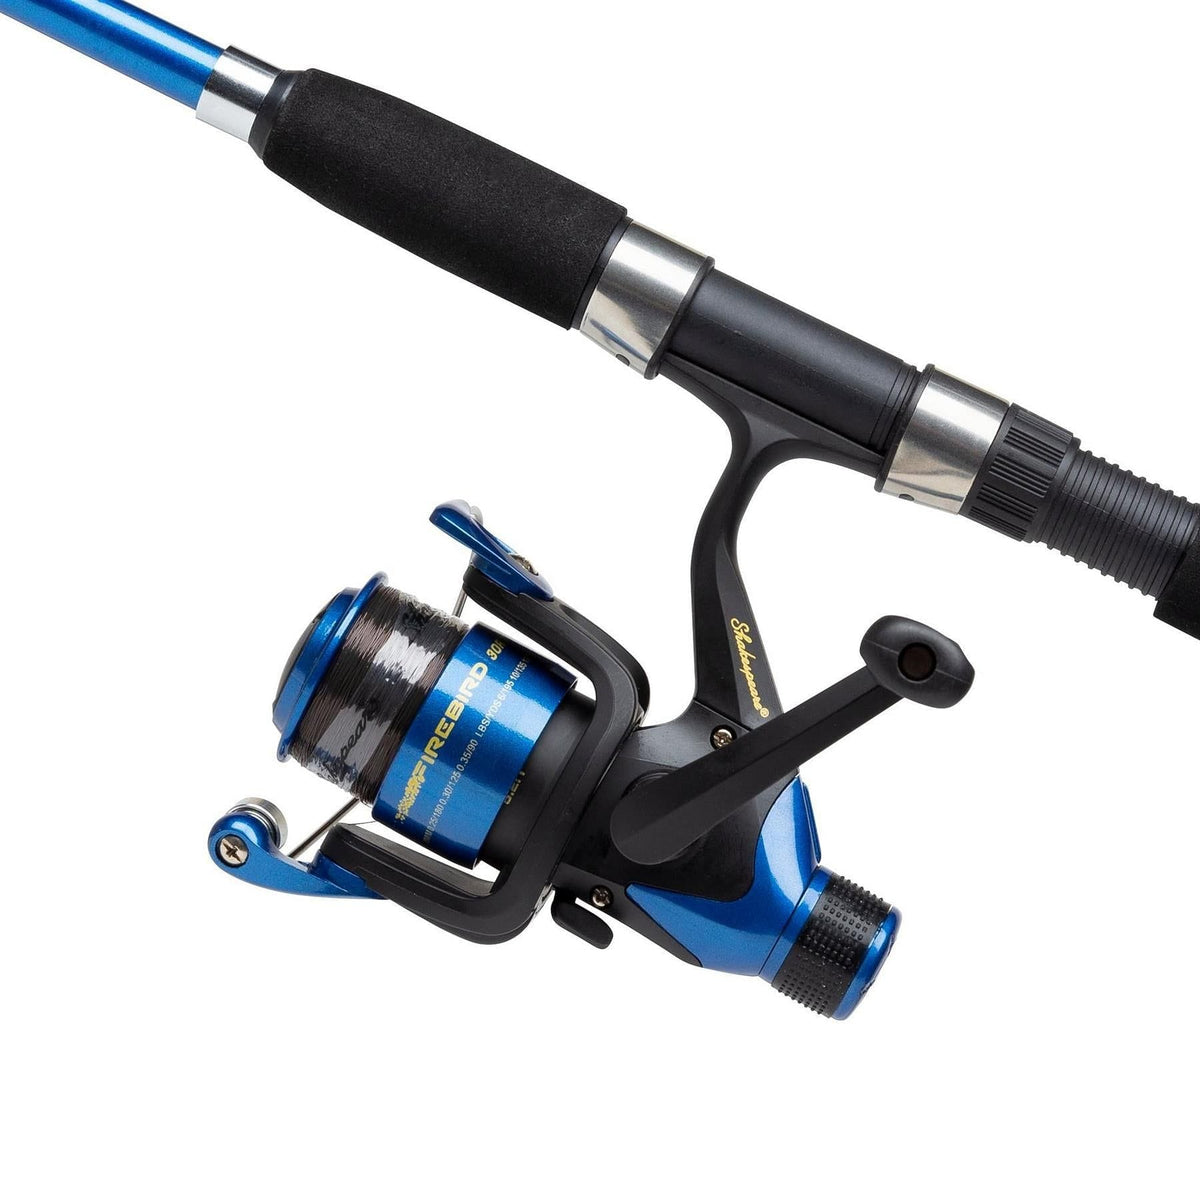 Shakespeare Firebird Tele Spin Combo Rod and Reel with Line - 7ft - 10-25g NEW